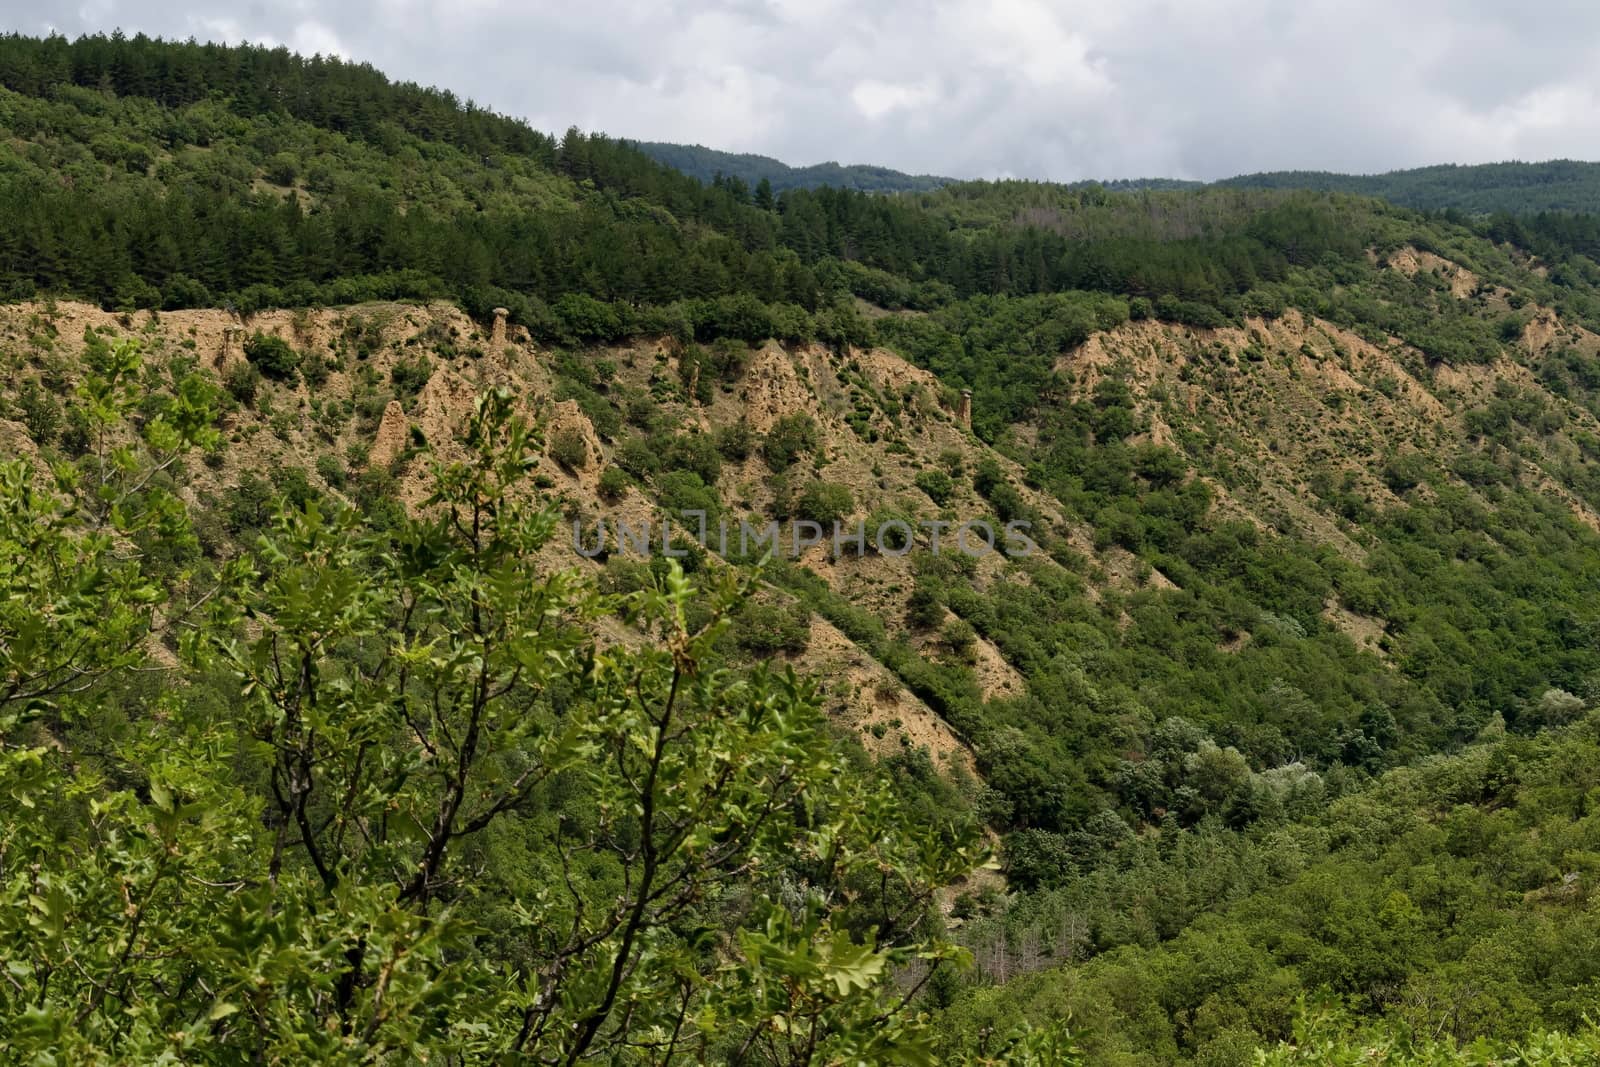 A view of the neighboring slope with new Stops pyramids of yellow rock formations, west share of Rila mountain, Kyustendil region, Bulgaria, Europe